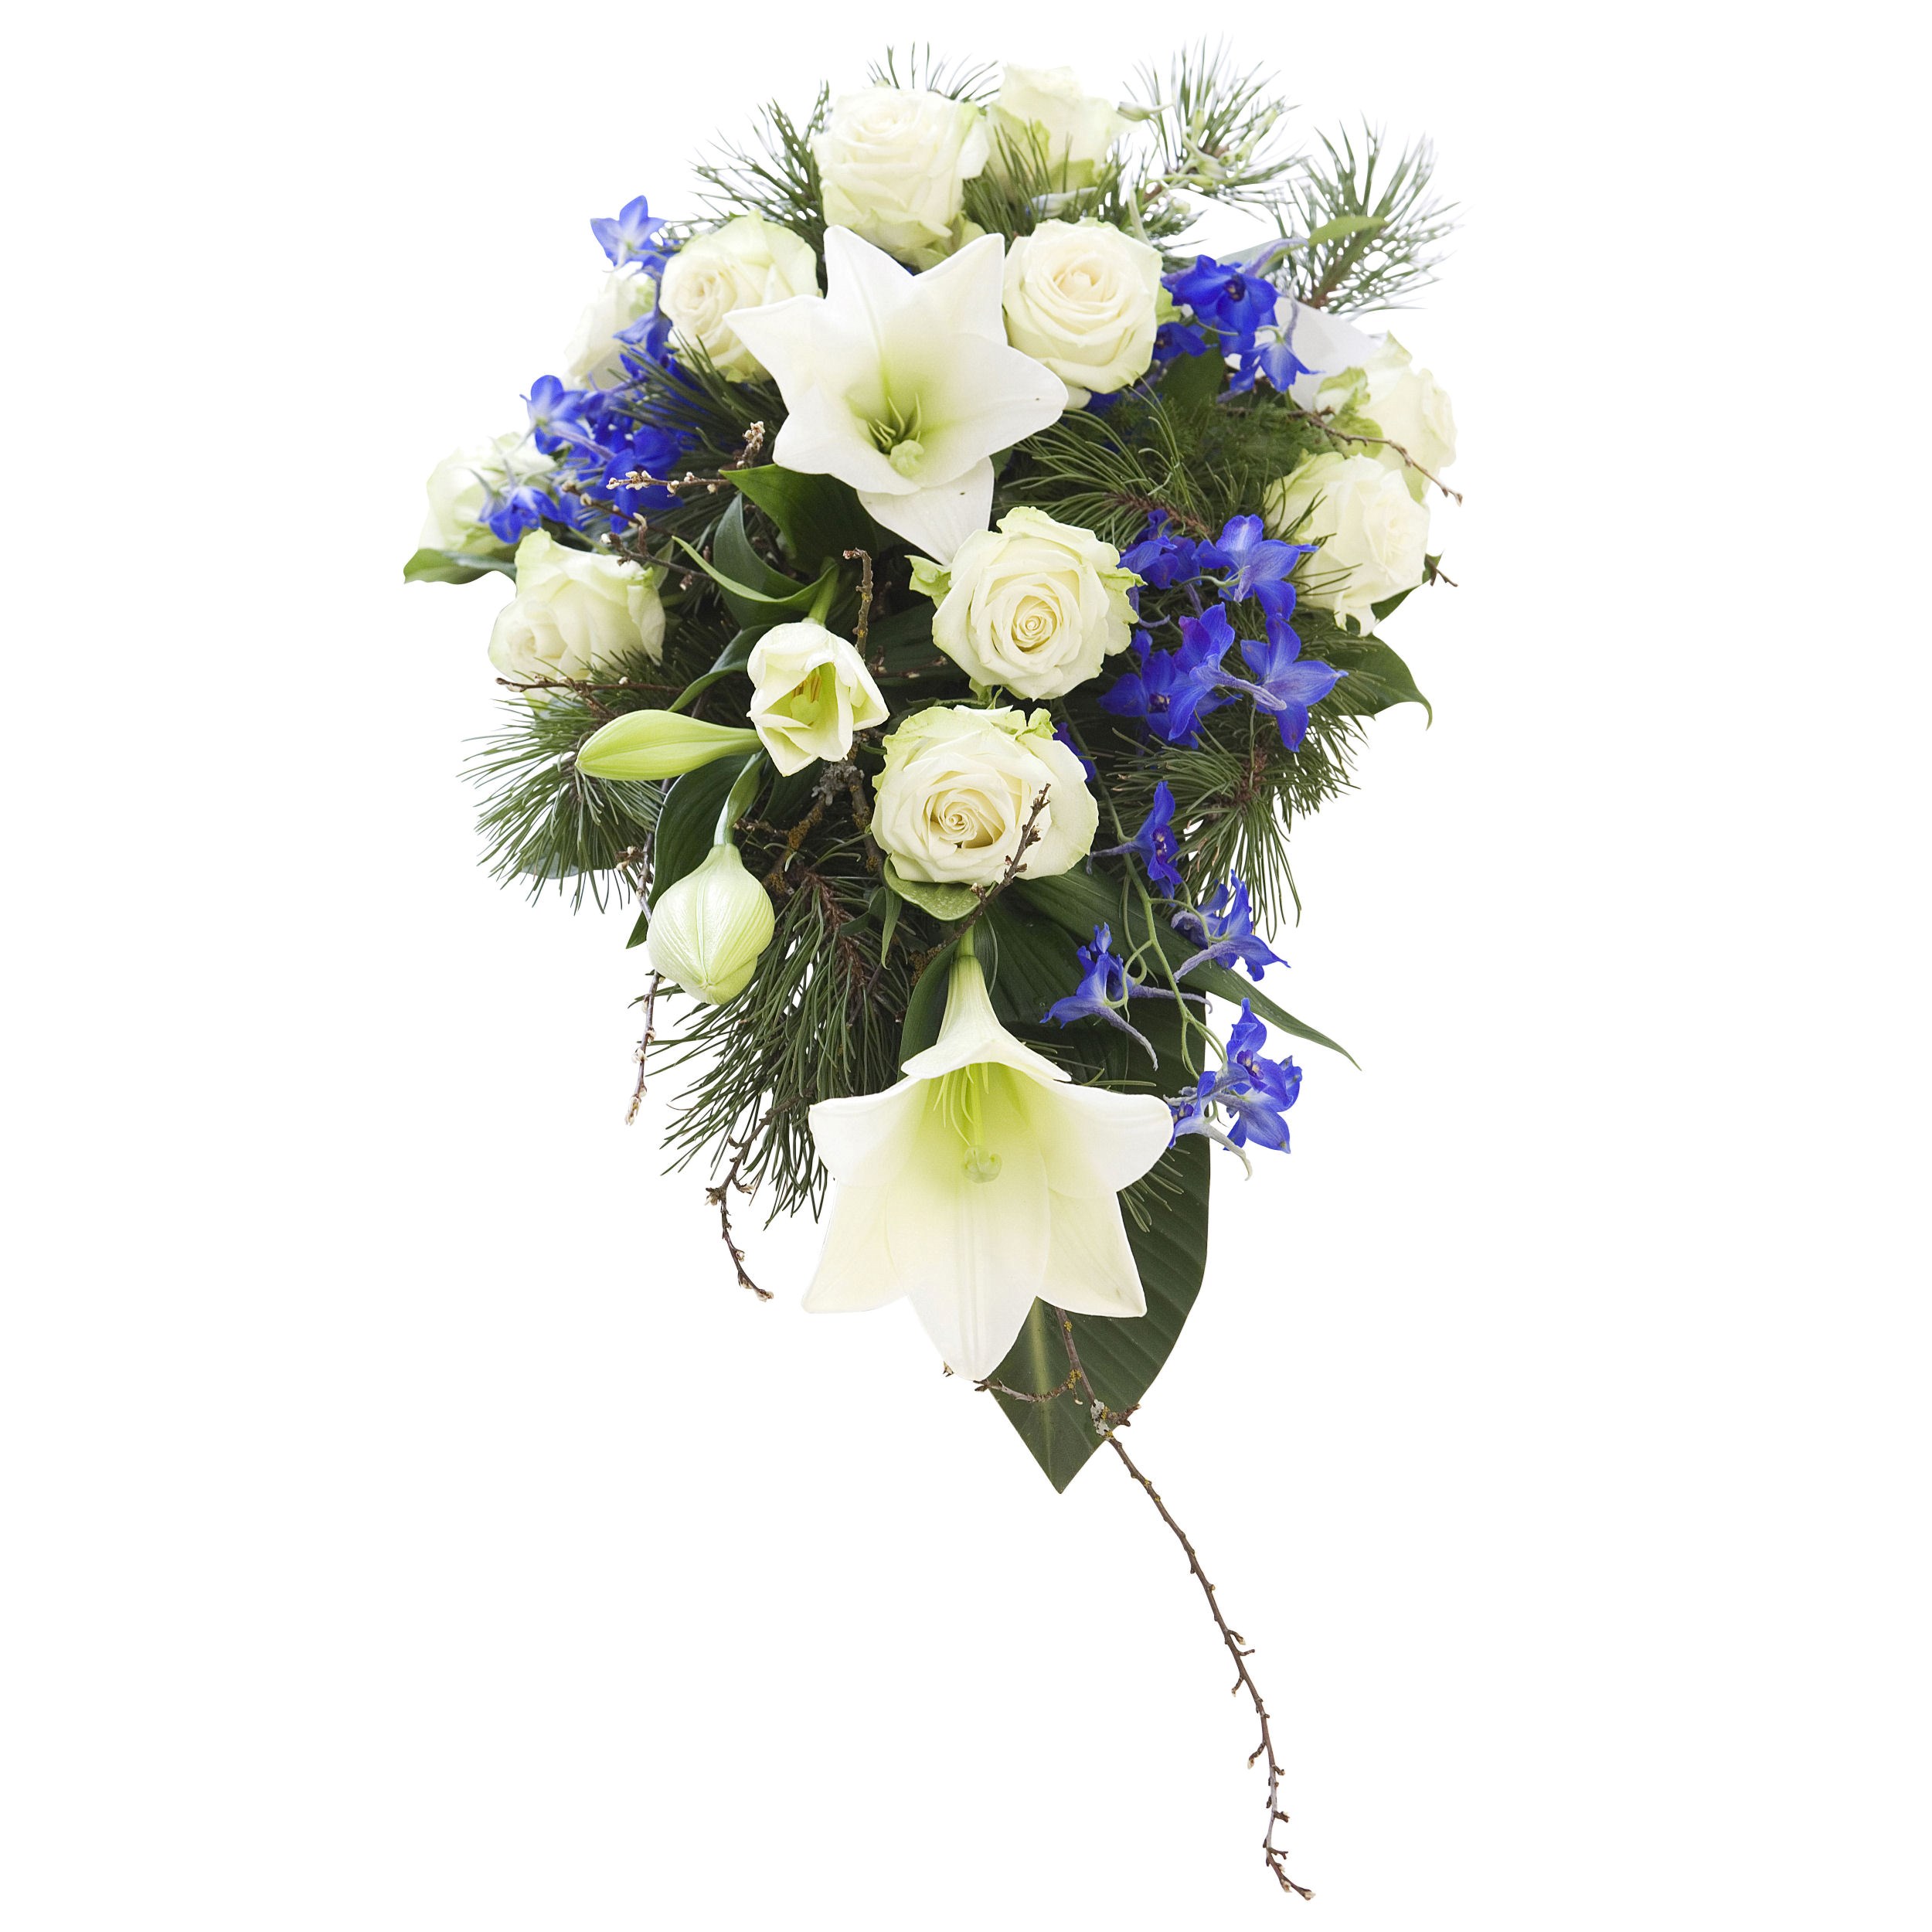 The sky is blue and white -funeral arrangement